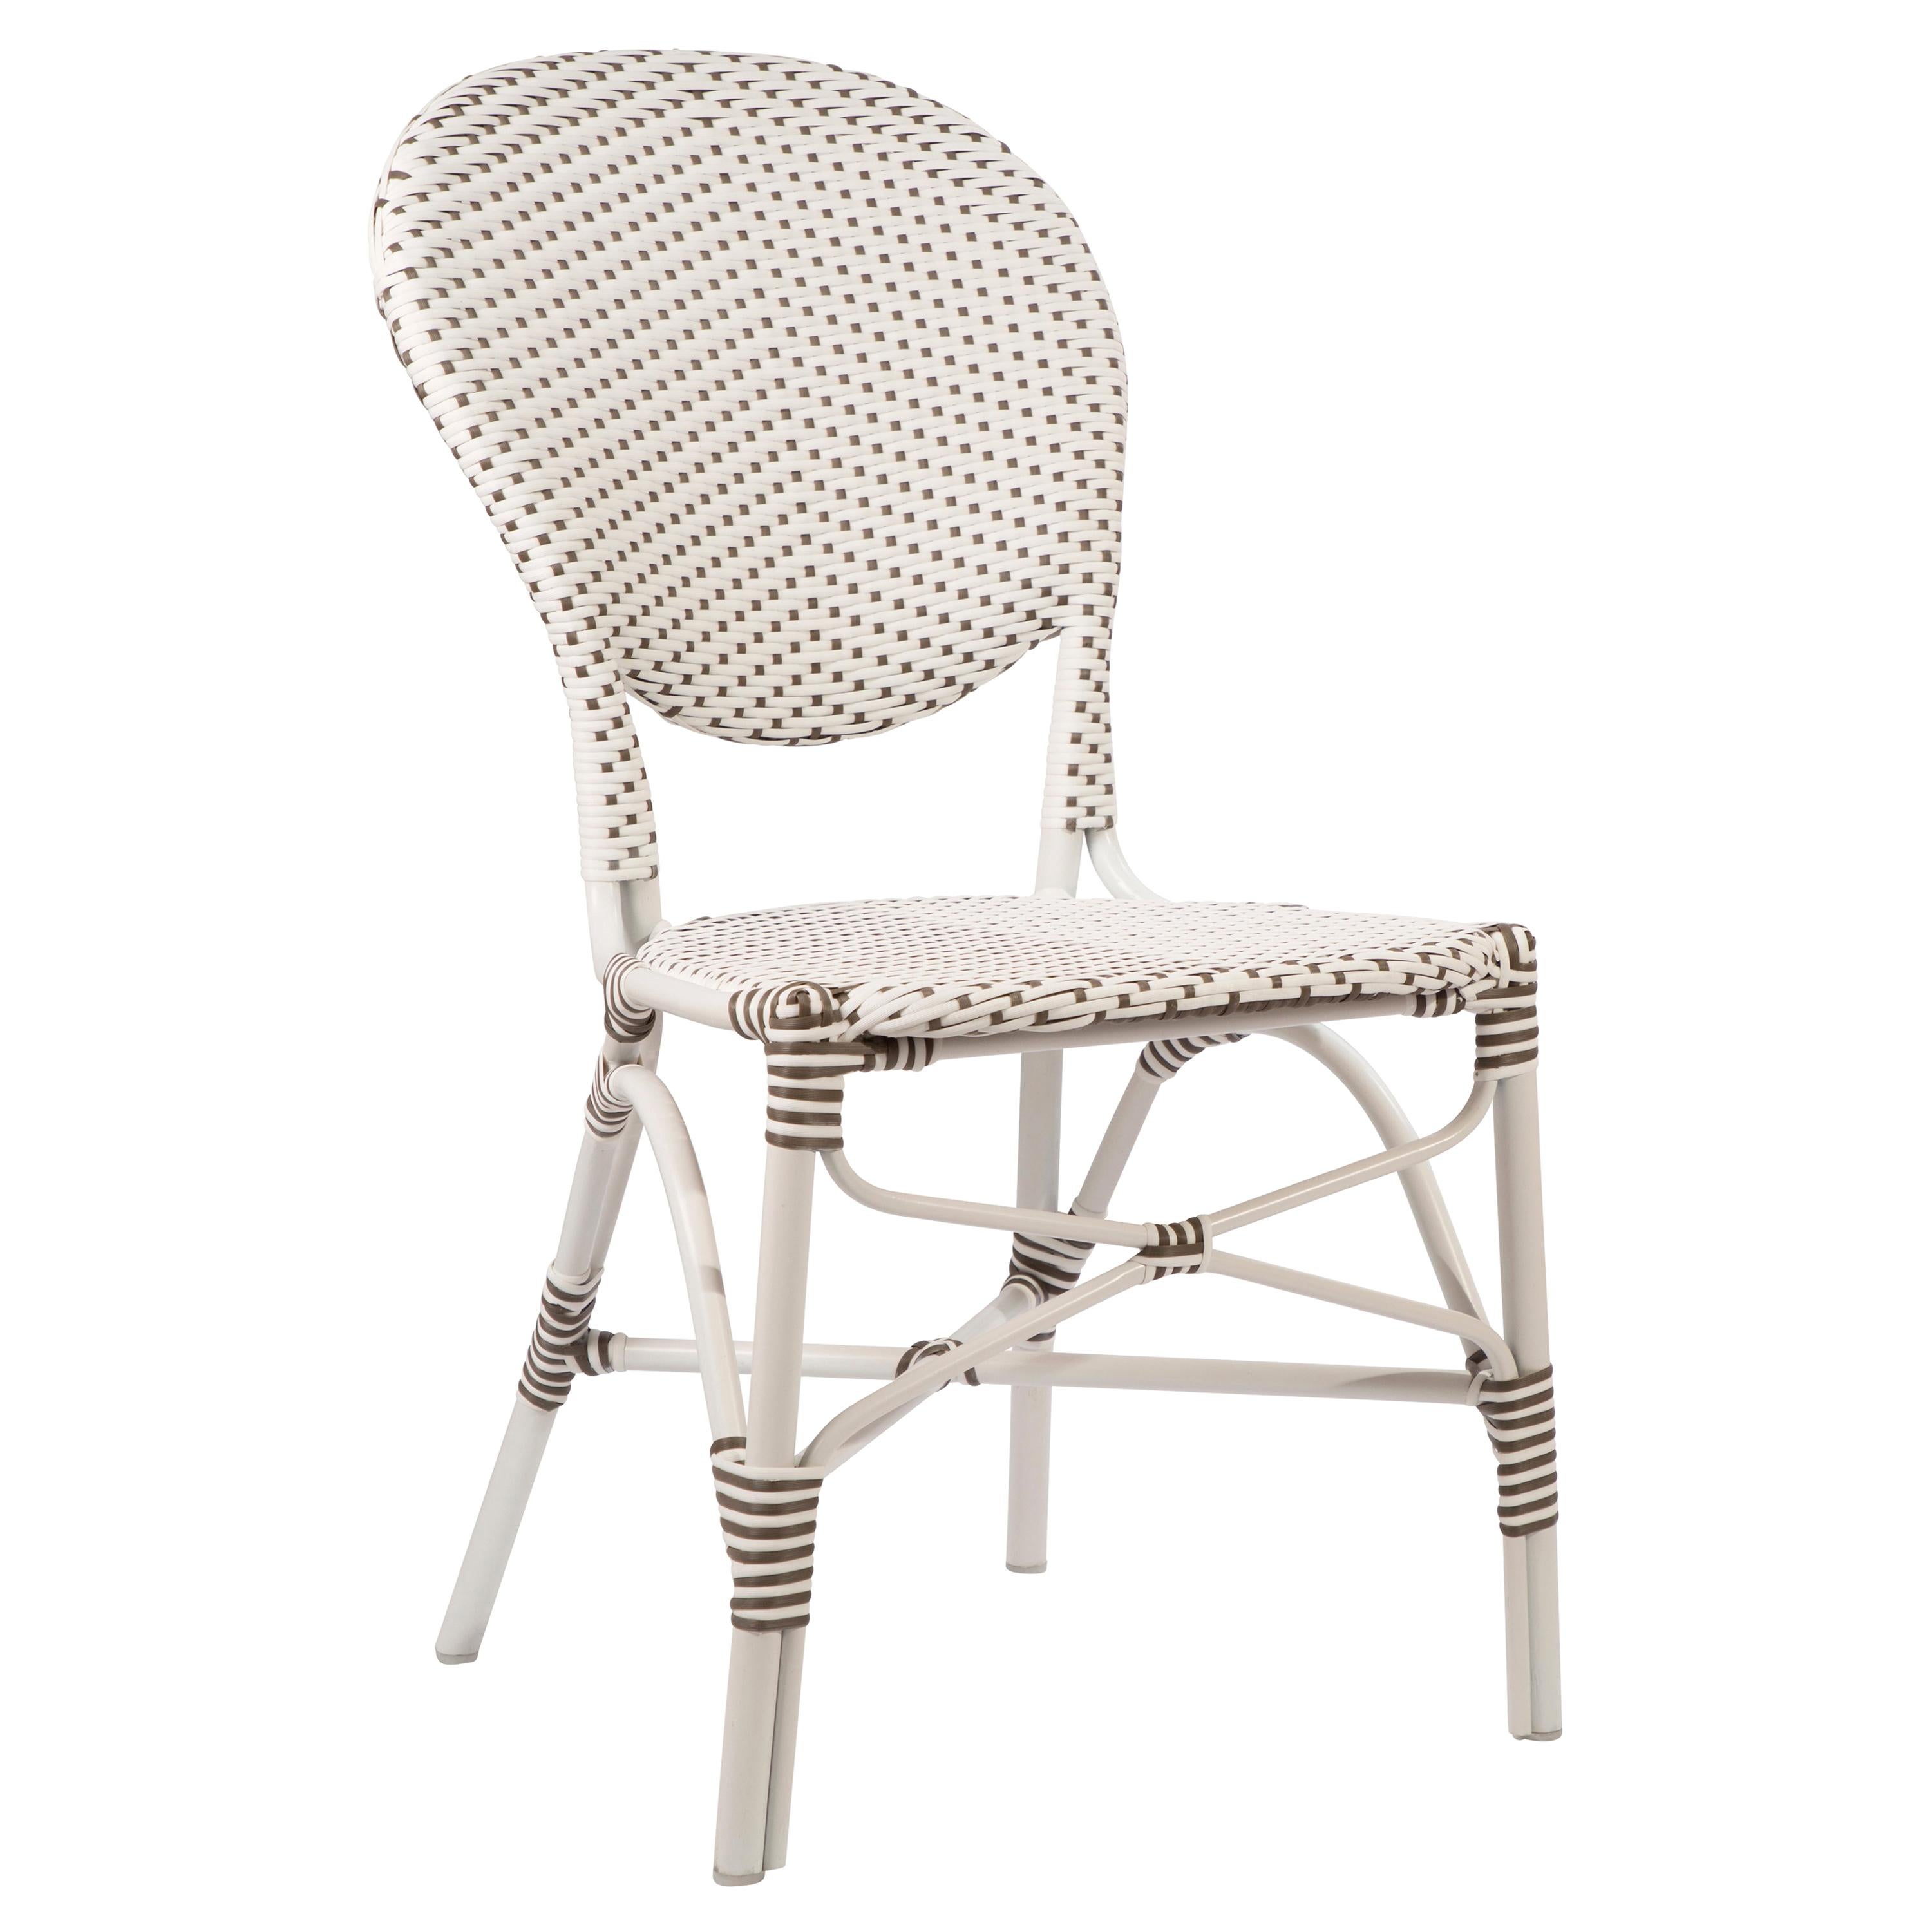 Sika Design Isabell Rattan Outdoor Bistro Side Chair in White w/ Cappuccino Dots